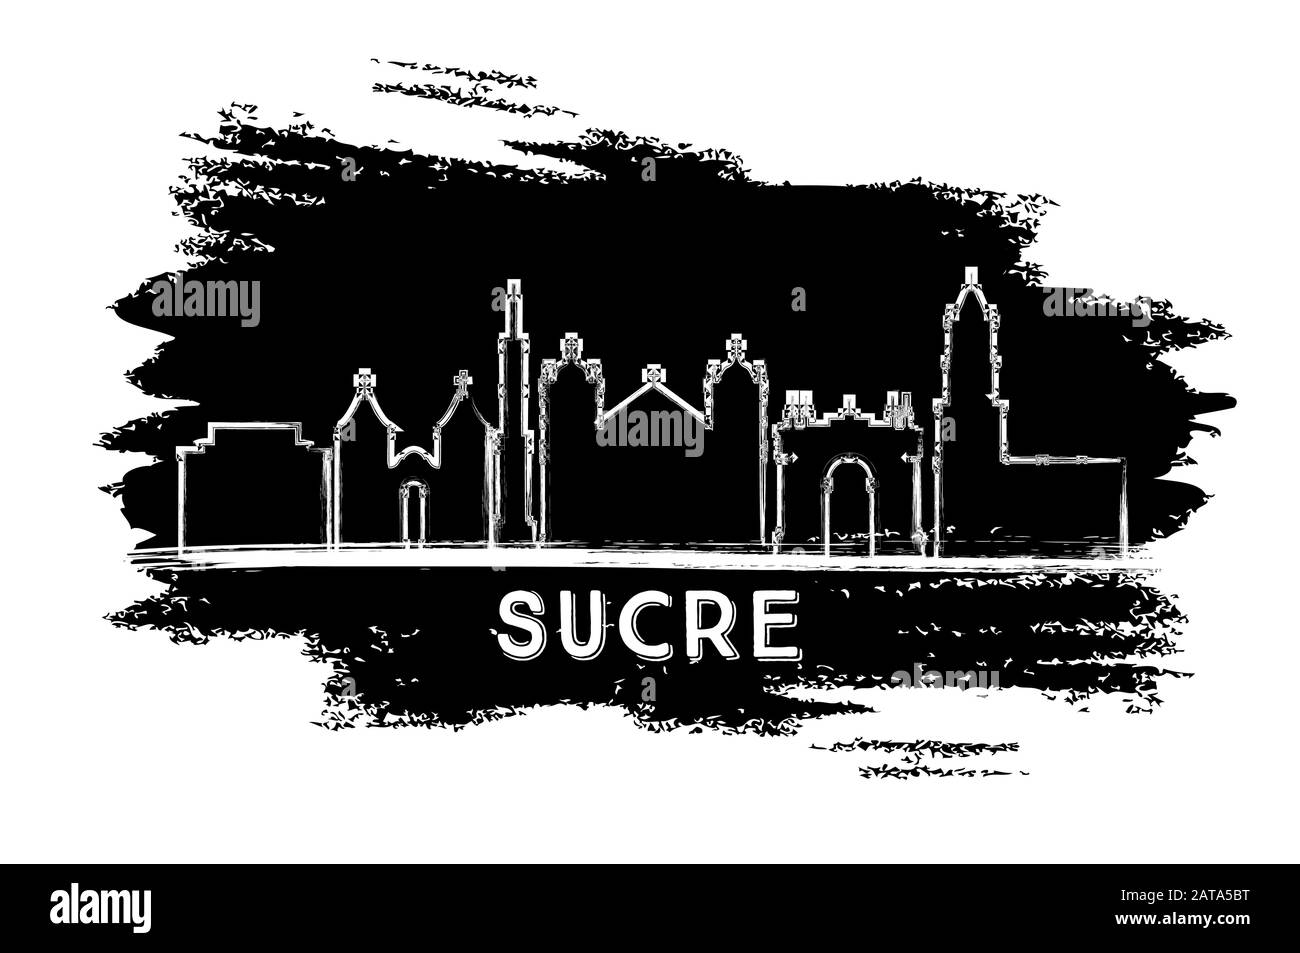 Sucre Bolivia City Skyline Silhouette. Hand Drawn Sketch. Vector Illustration. Business Travel and Tourism Concept with Modern Architecture. Stock Vector